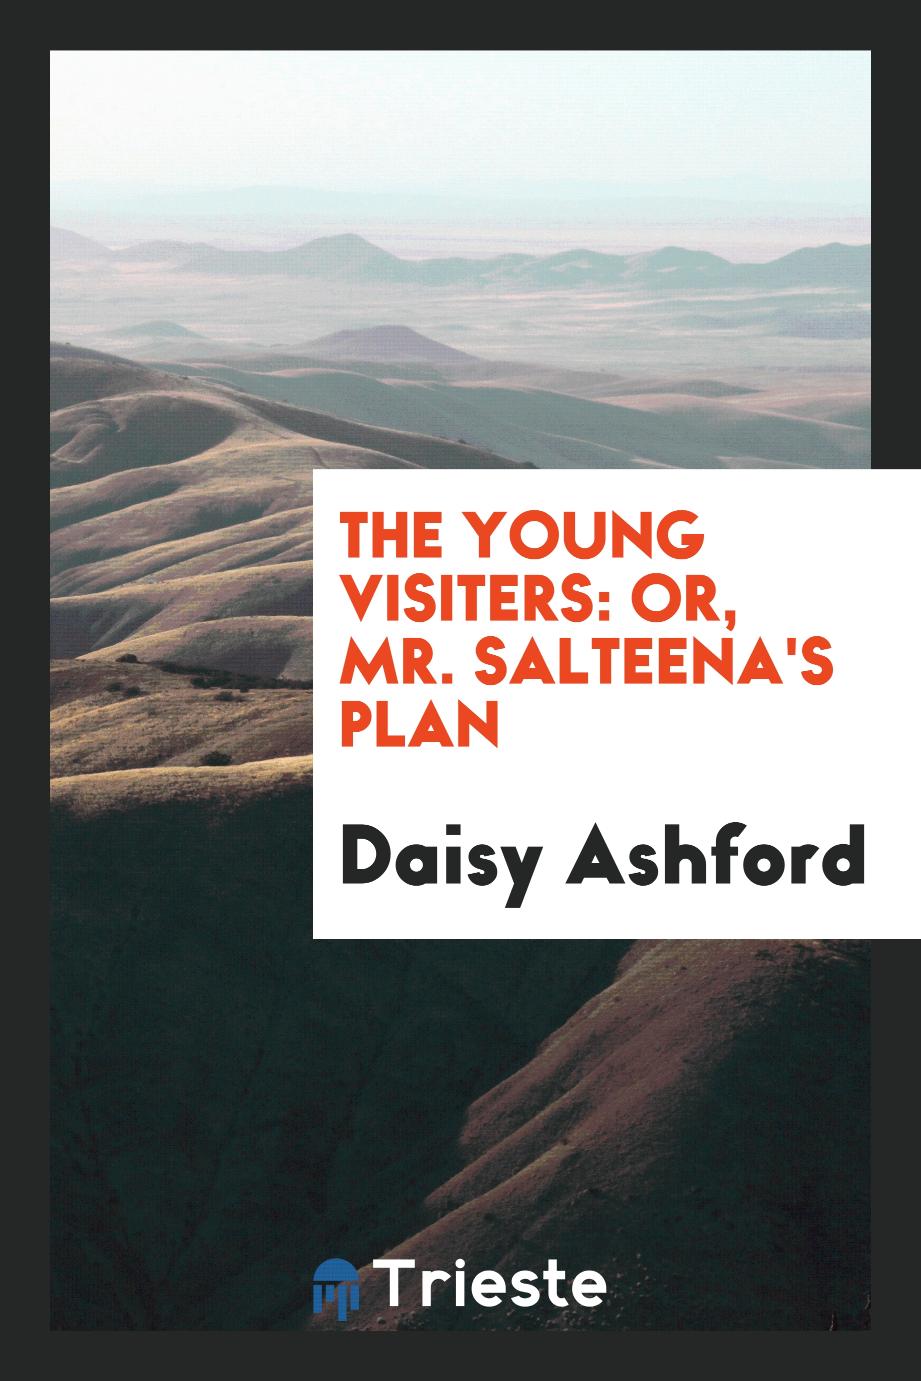 The Young Visiters: or, Mr. Salteena's Plan